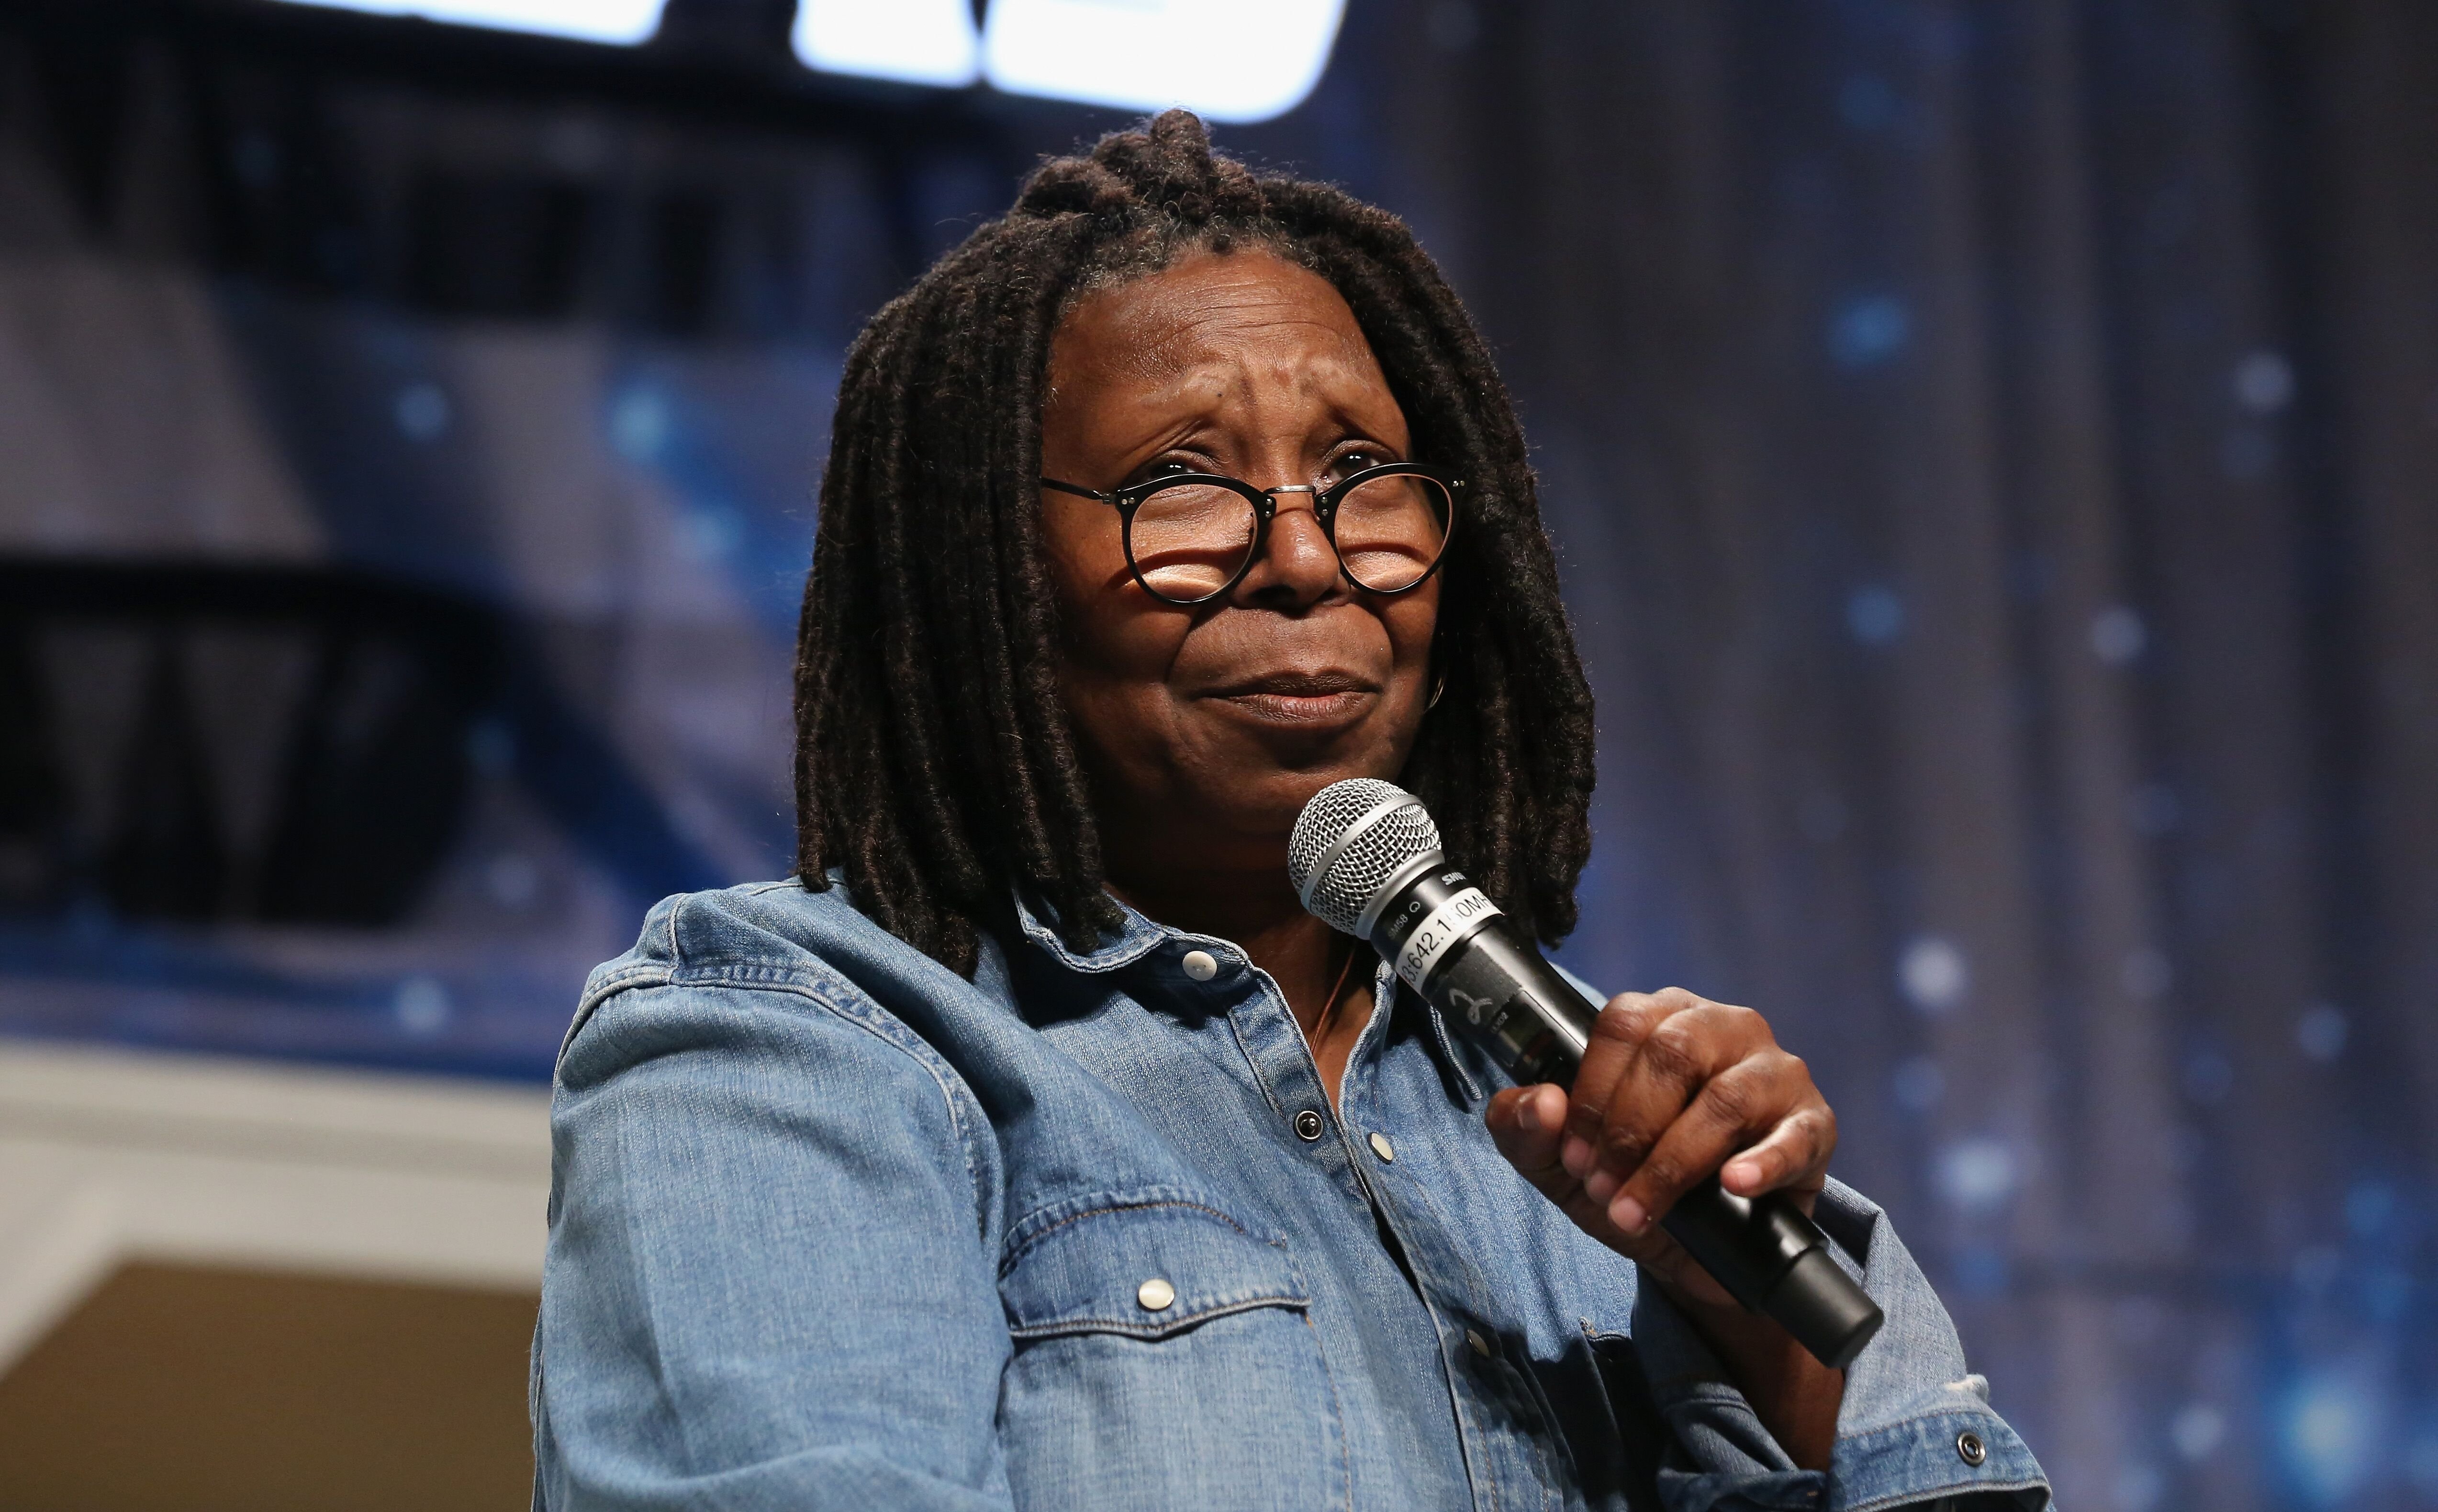 Whoopi Goldberg at the 15th annual official Star Trek convention on Aug. 4, 2016 in Las Vegas | Source: Getty Images